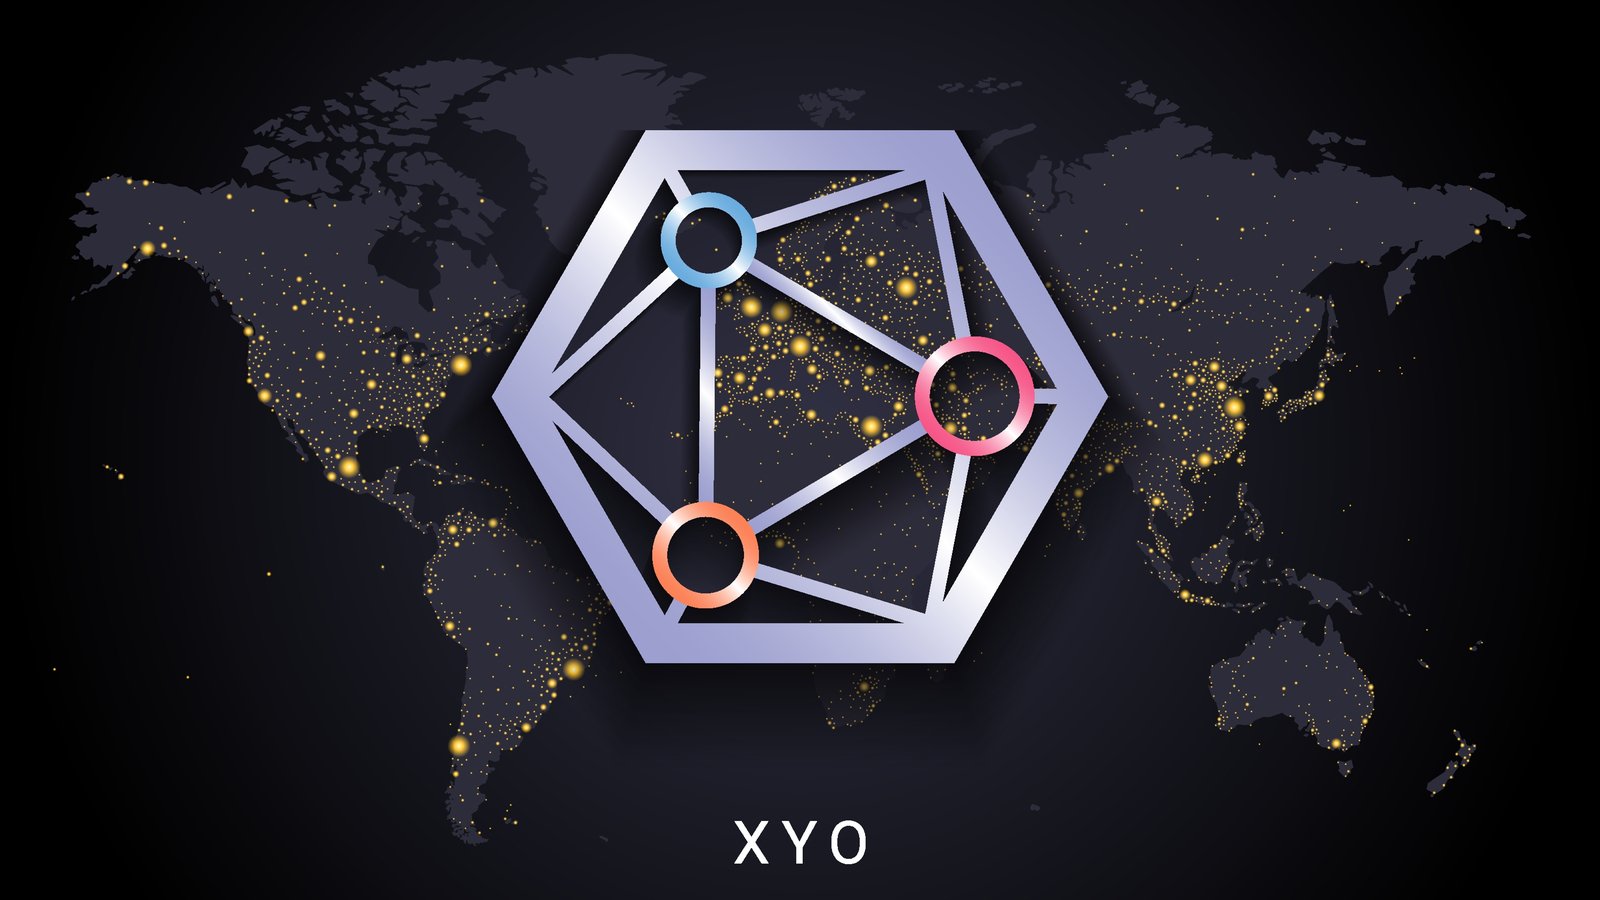 A concept image of the XYO cryptocurrency logo displayed over a map of the Earth.